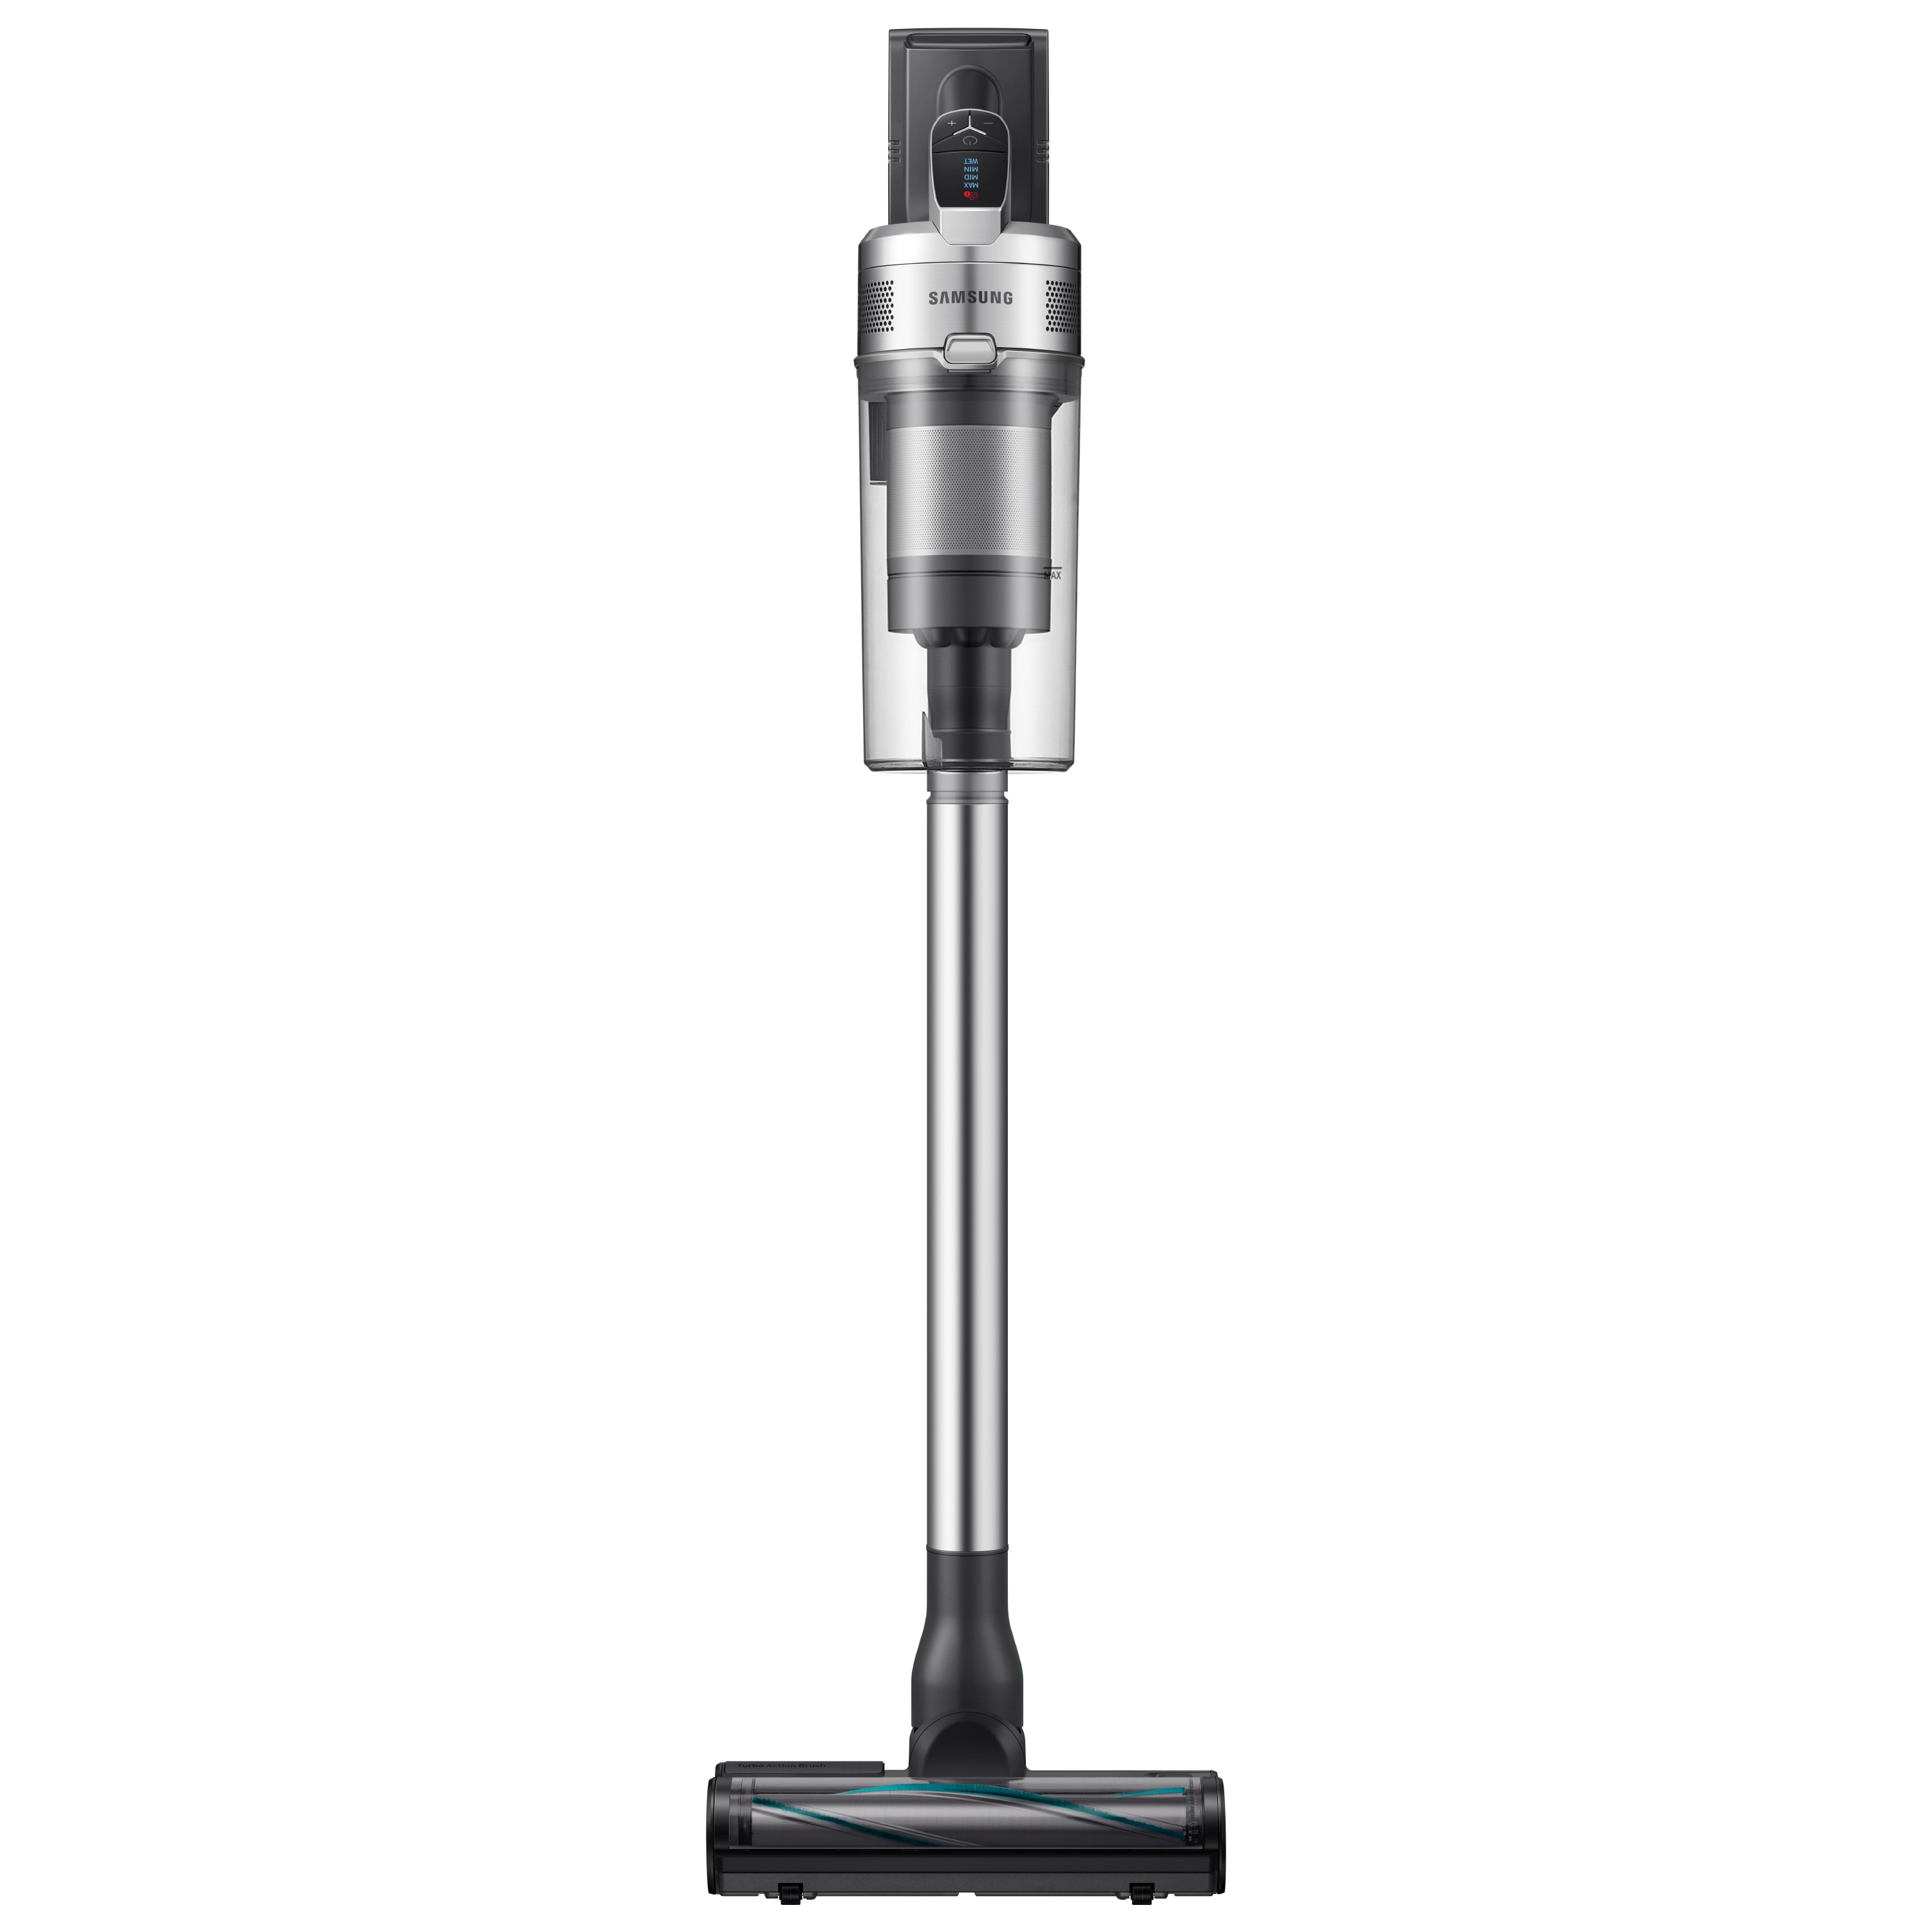 Samsung Jet 90 21.9 department Handheld) Stick the Vacuums Vacuum Clean Stick (Convertible at Volt To Pet Bundle Station Cordless in and